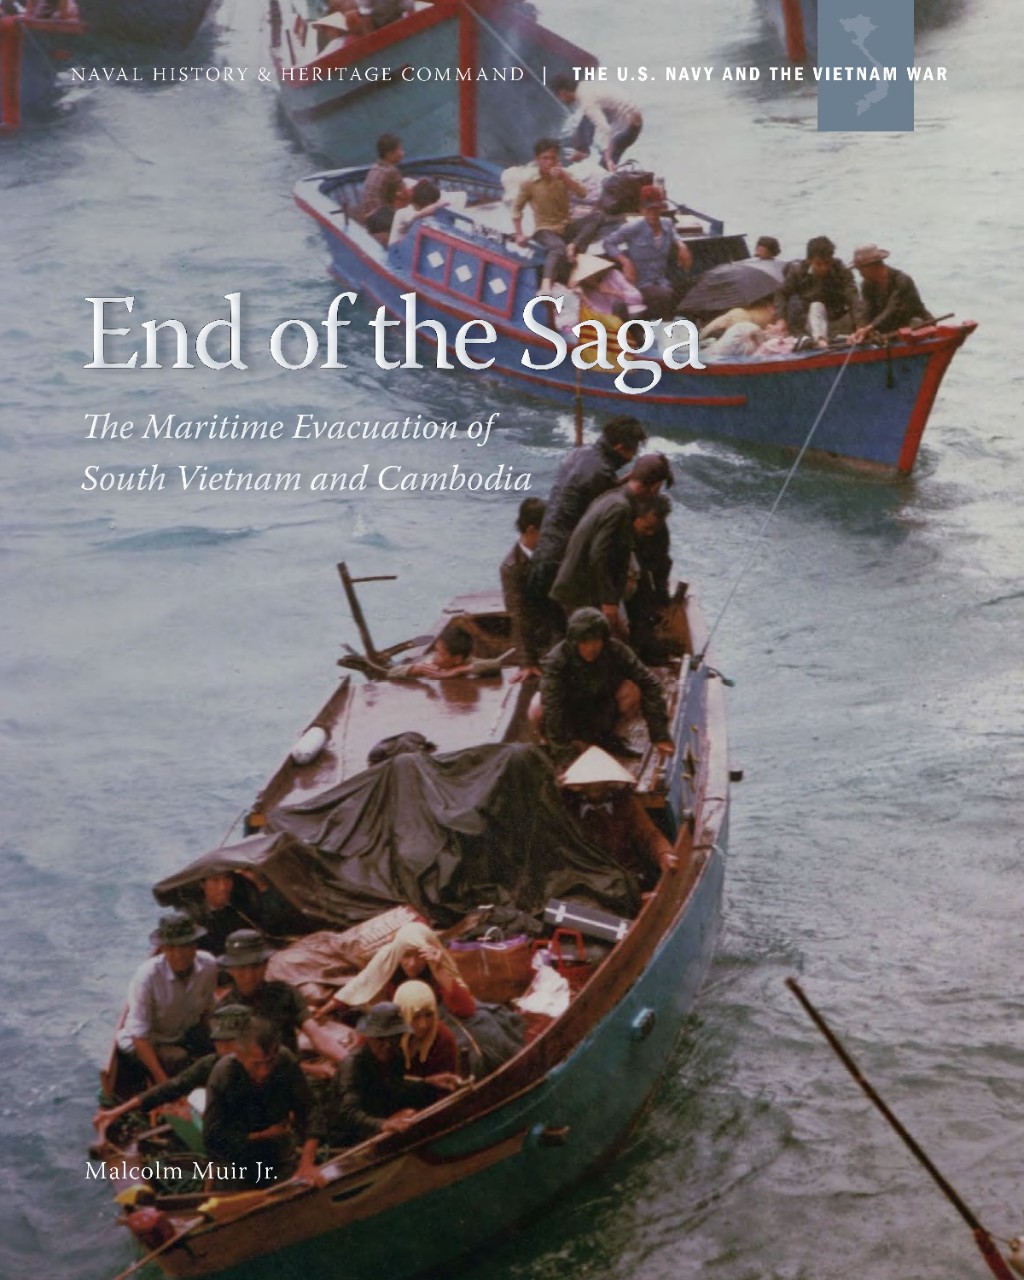 Book Cover of End of the Saga: The Maritime Evacuation of South Vietnam and Cambodia